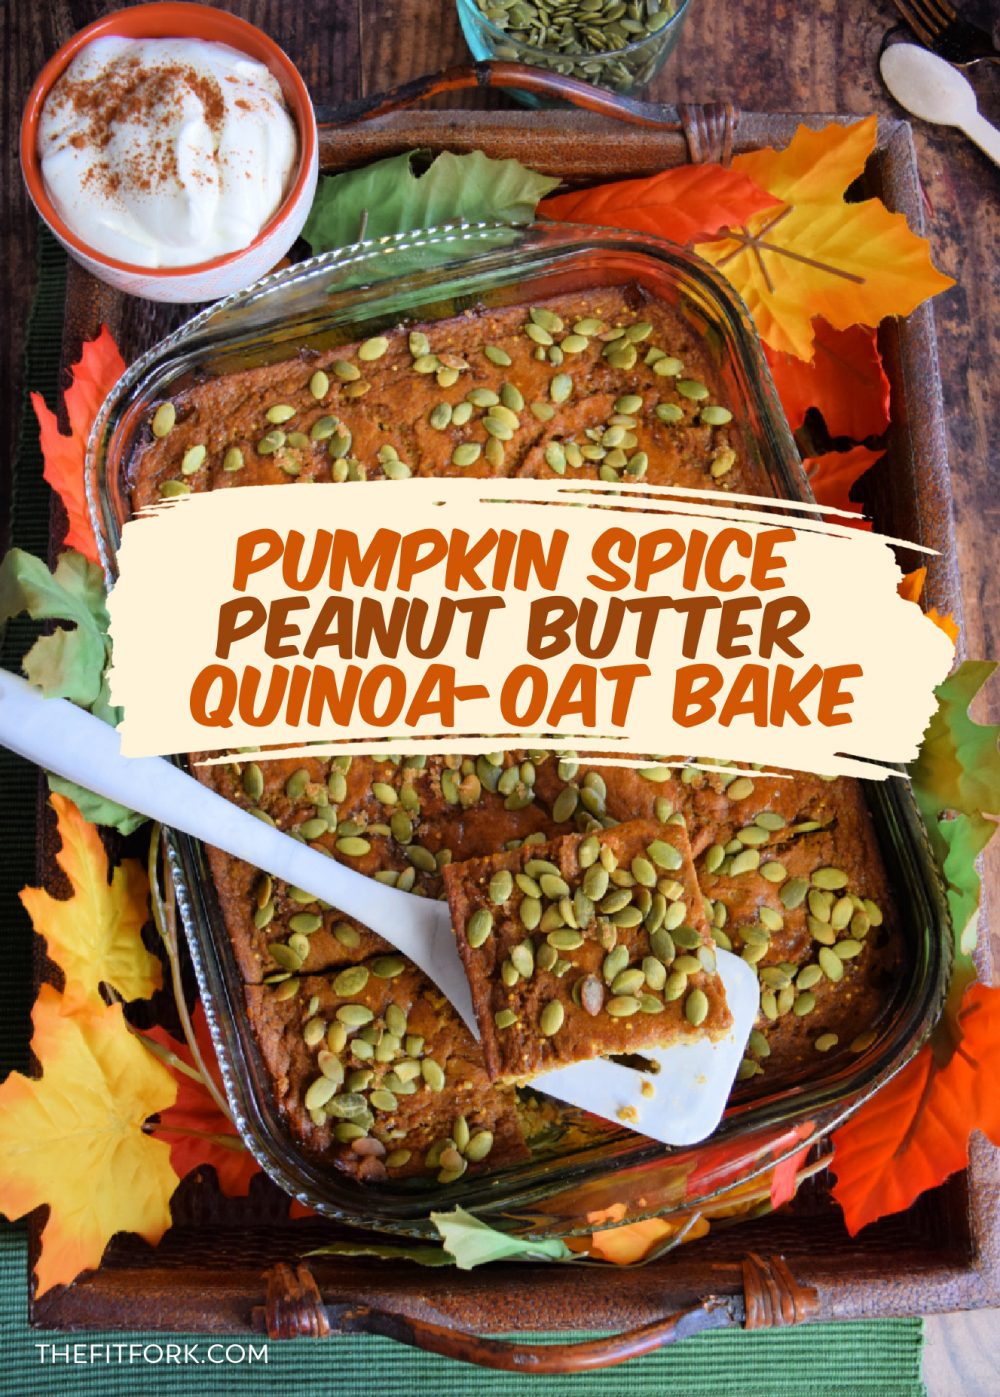 Pumpkin Spice Peanut Butter Quinoa Oat Bake is a hearty, healthy, wholesome morning meal that is easy to meal prep for breakfast on the go. Filled with whole grains, fiber, lower carbs thanks to sugar swaps, and protein from peanut butter powder. Freezer friendly and gluten free, Visit thefitfork.com for more clean eating recipes. 